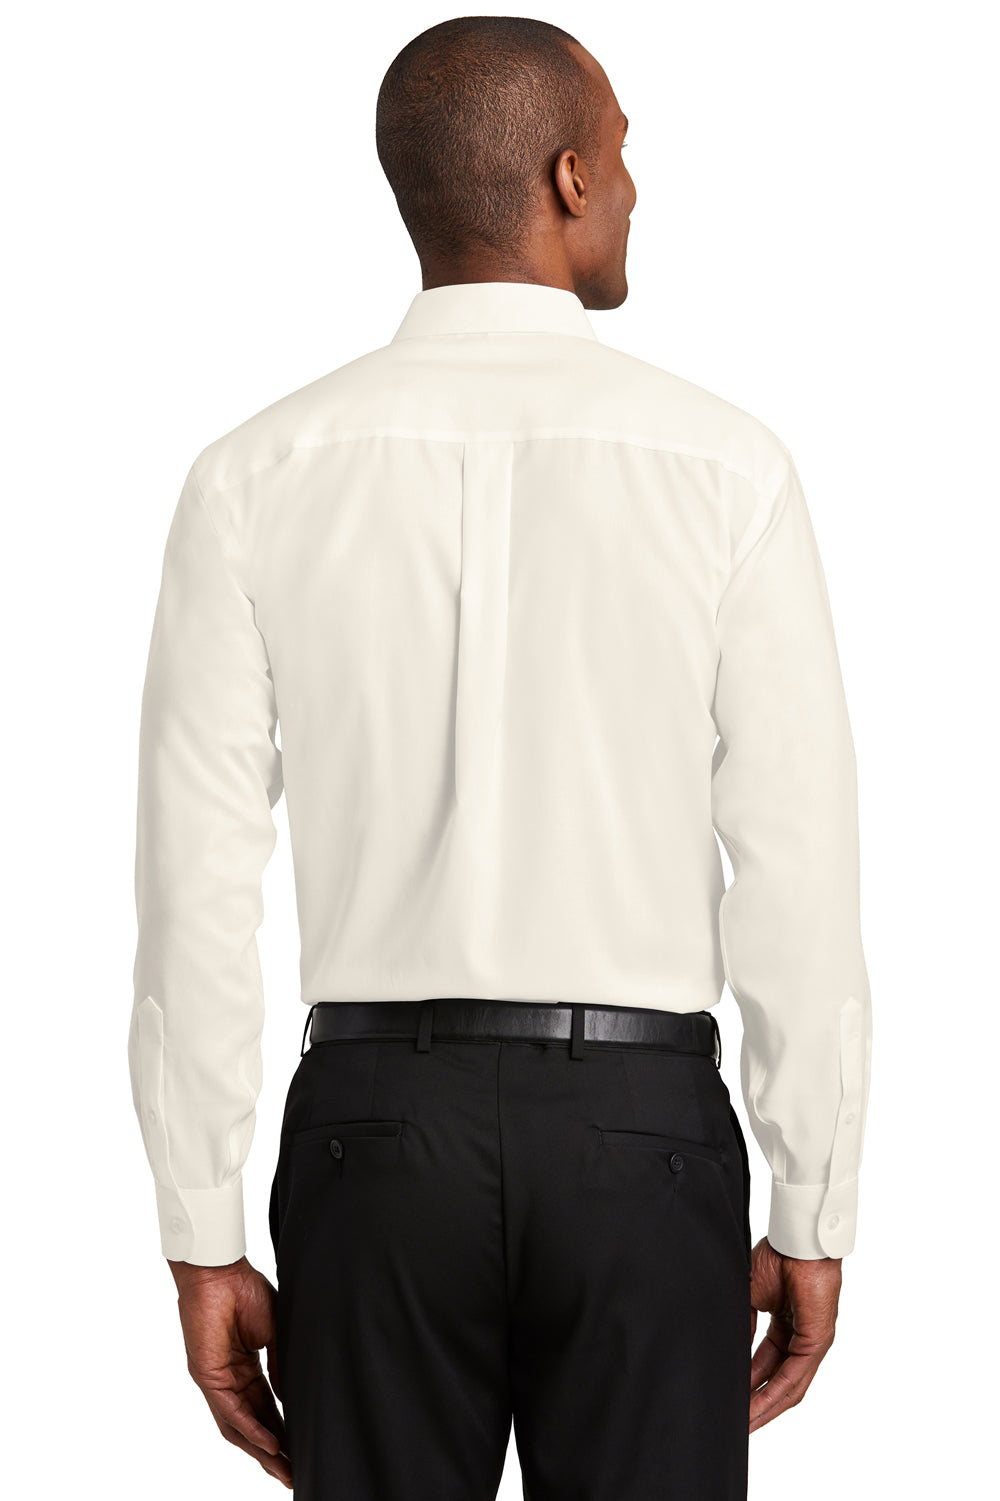 Red House RH240/TLRH240 Mens Pinpoint Oxford Wrinkle Resistant Long Sleeve Button Down Shirt w/ Pocket Ivory Chiffon White Back